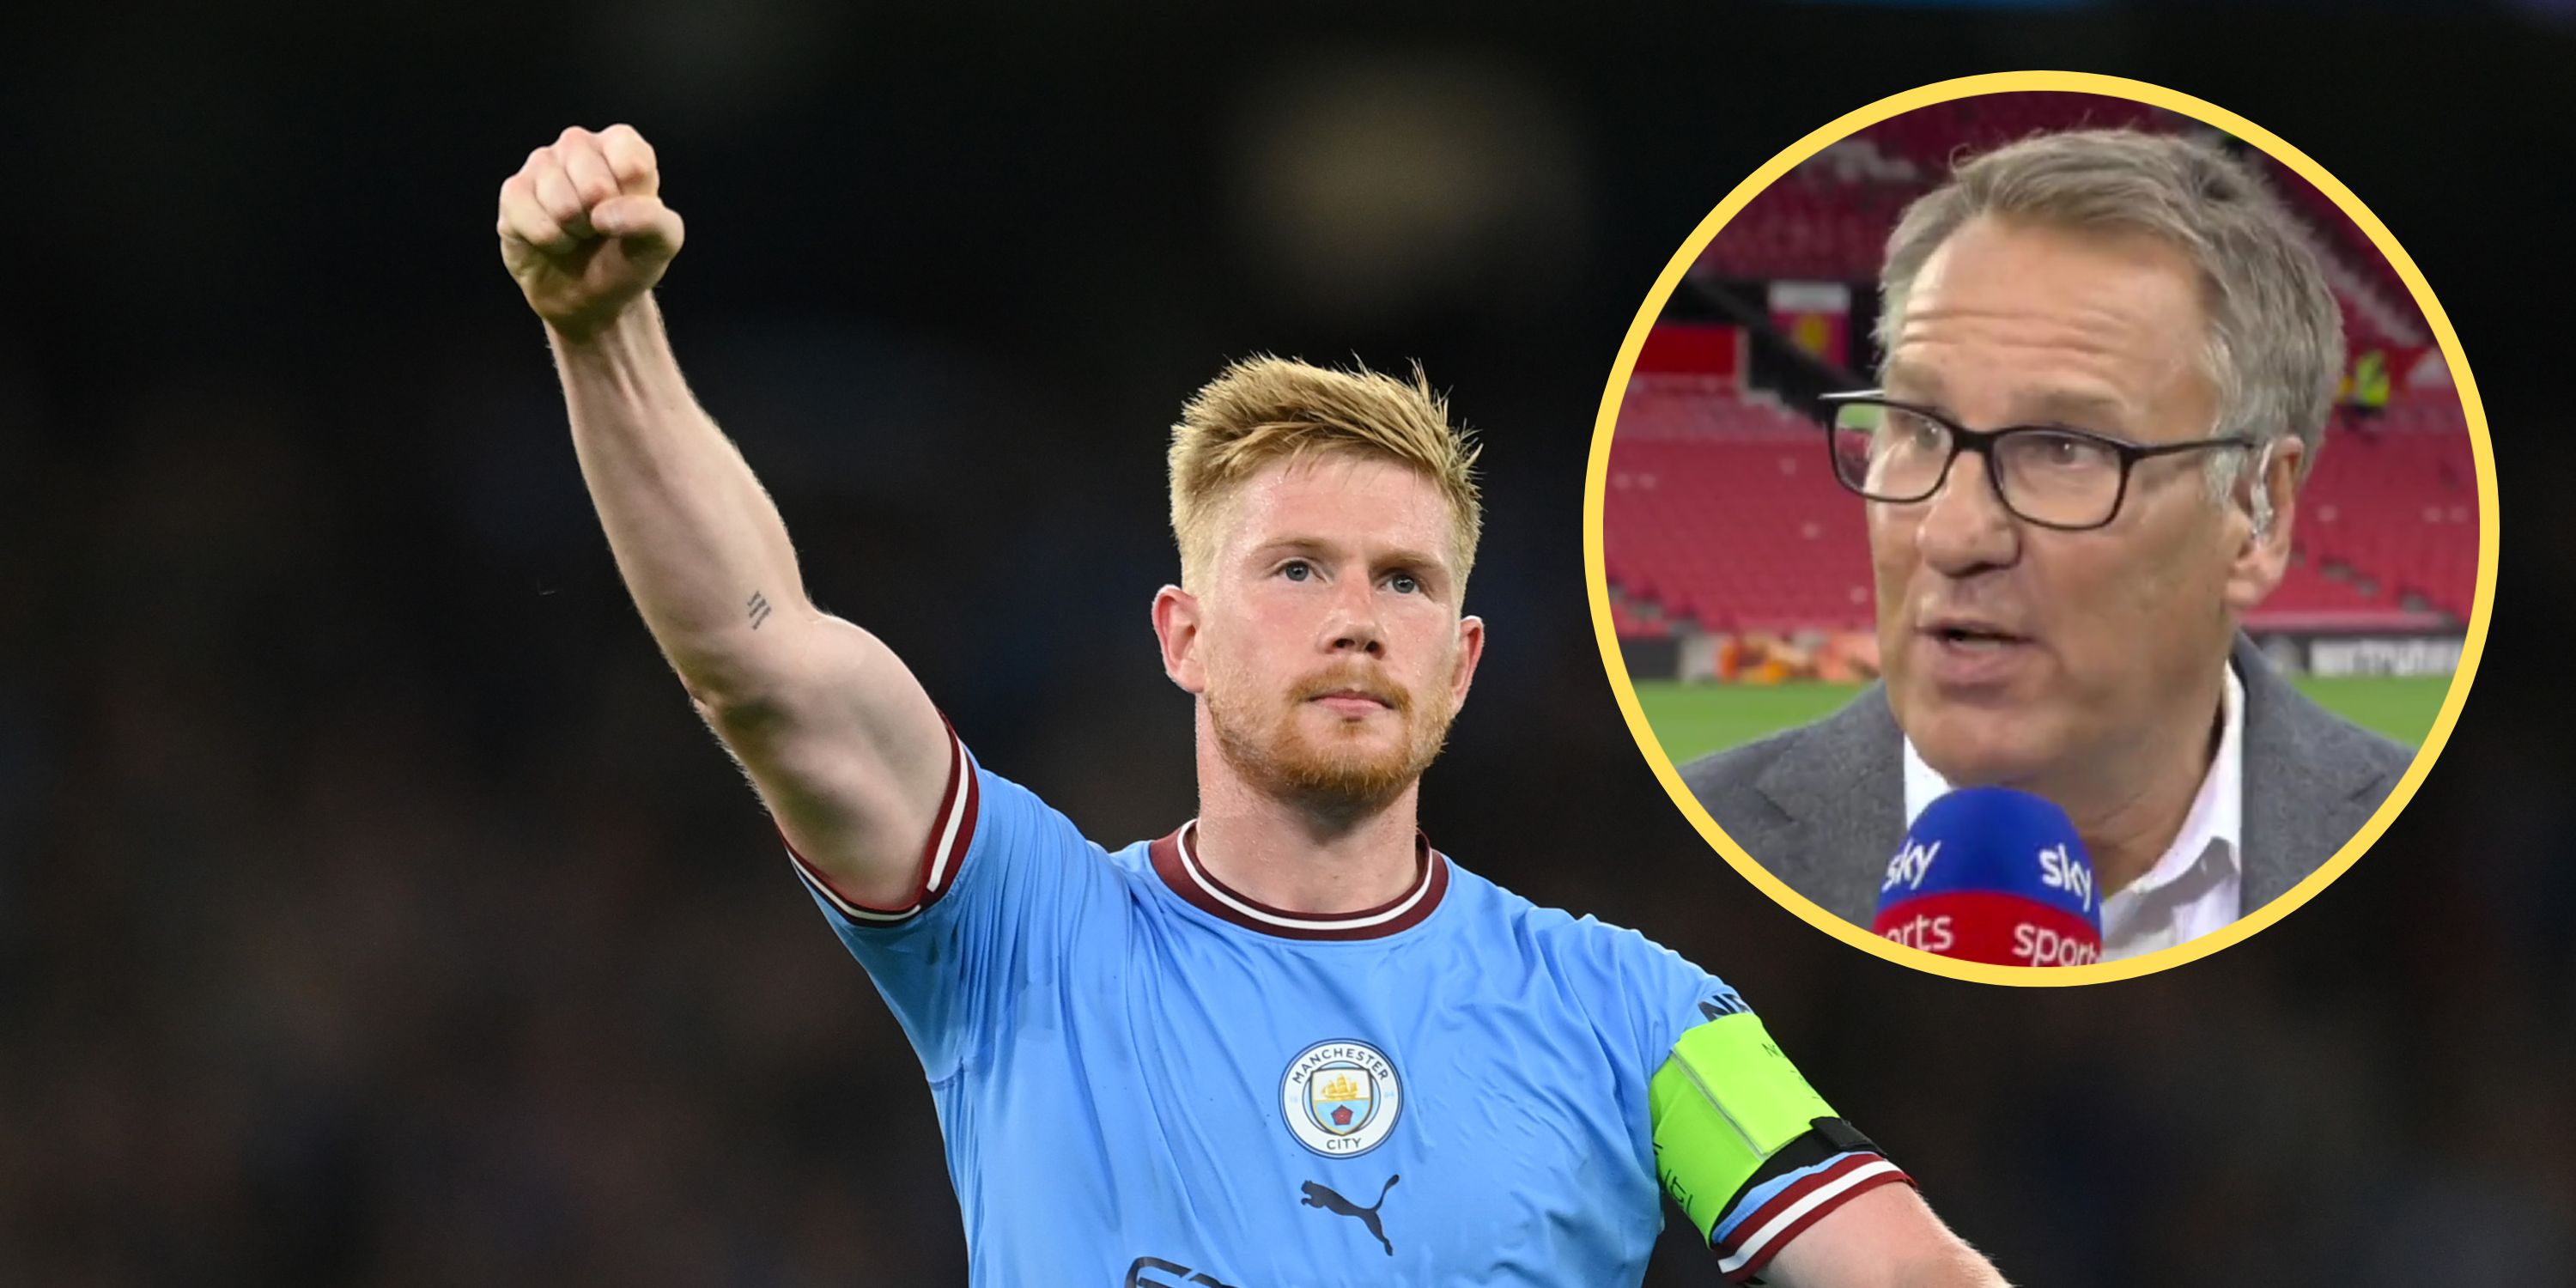 Paul Merson compares 23-year-old Liverpool star to Kevin De Bruyne: ‘Up there with the best’